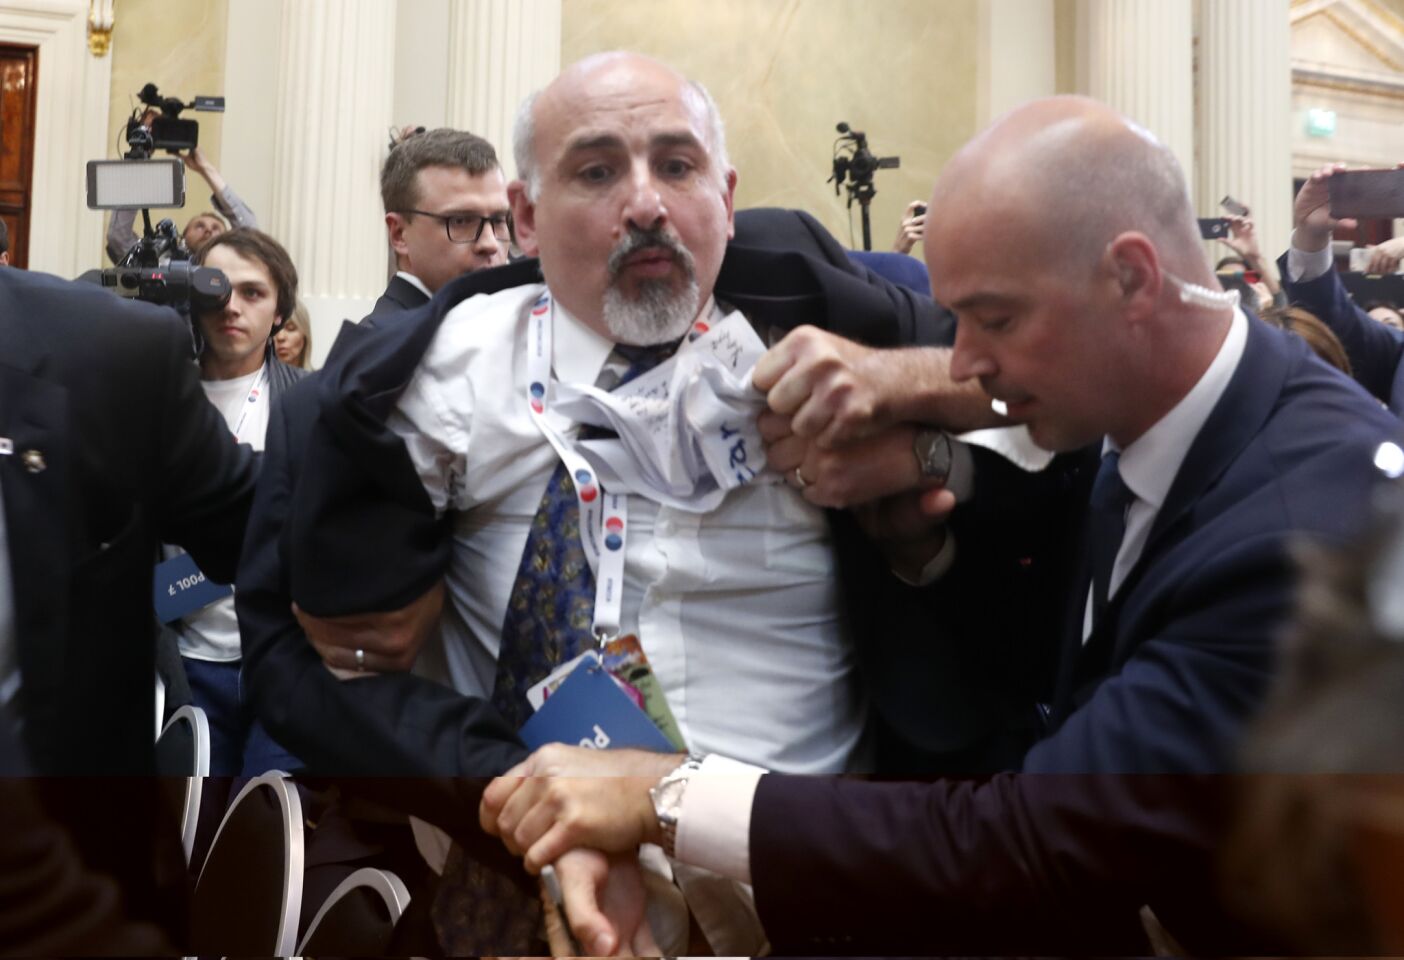 Security staff detain a man prior to a press conference by President Trump and Russian President Vladimir Putin at the Presidential Palace in Helsinki, Finland.